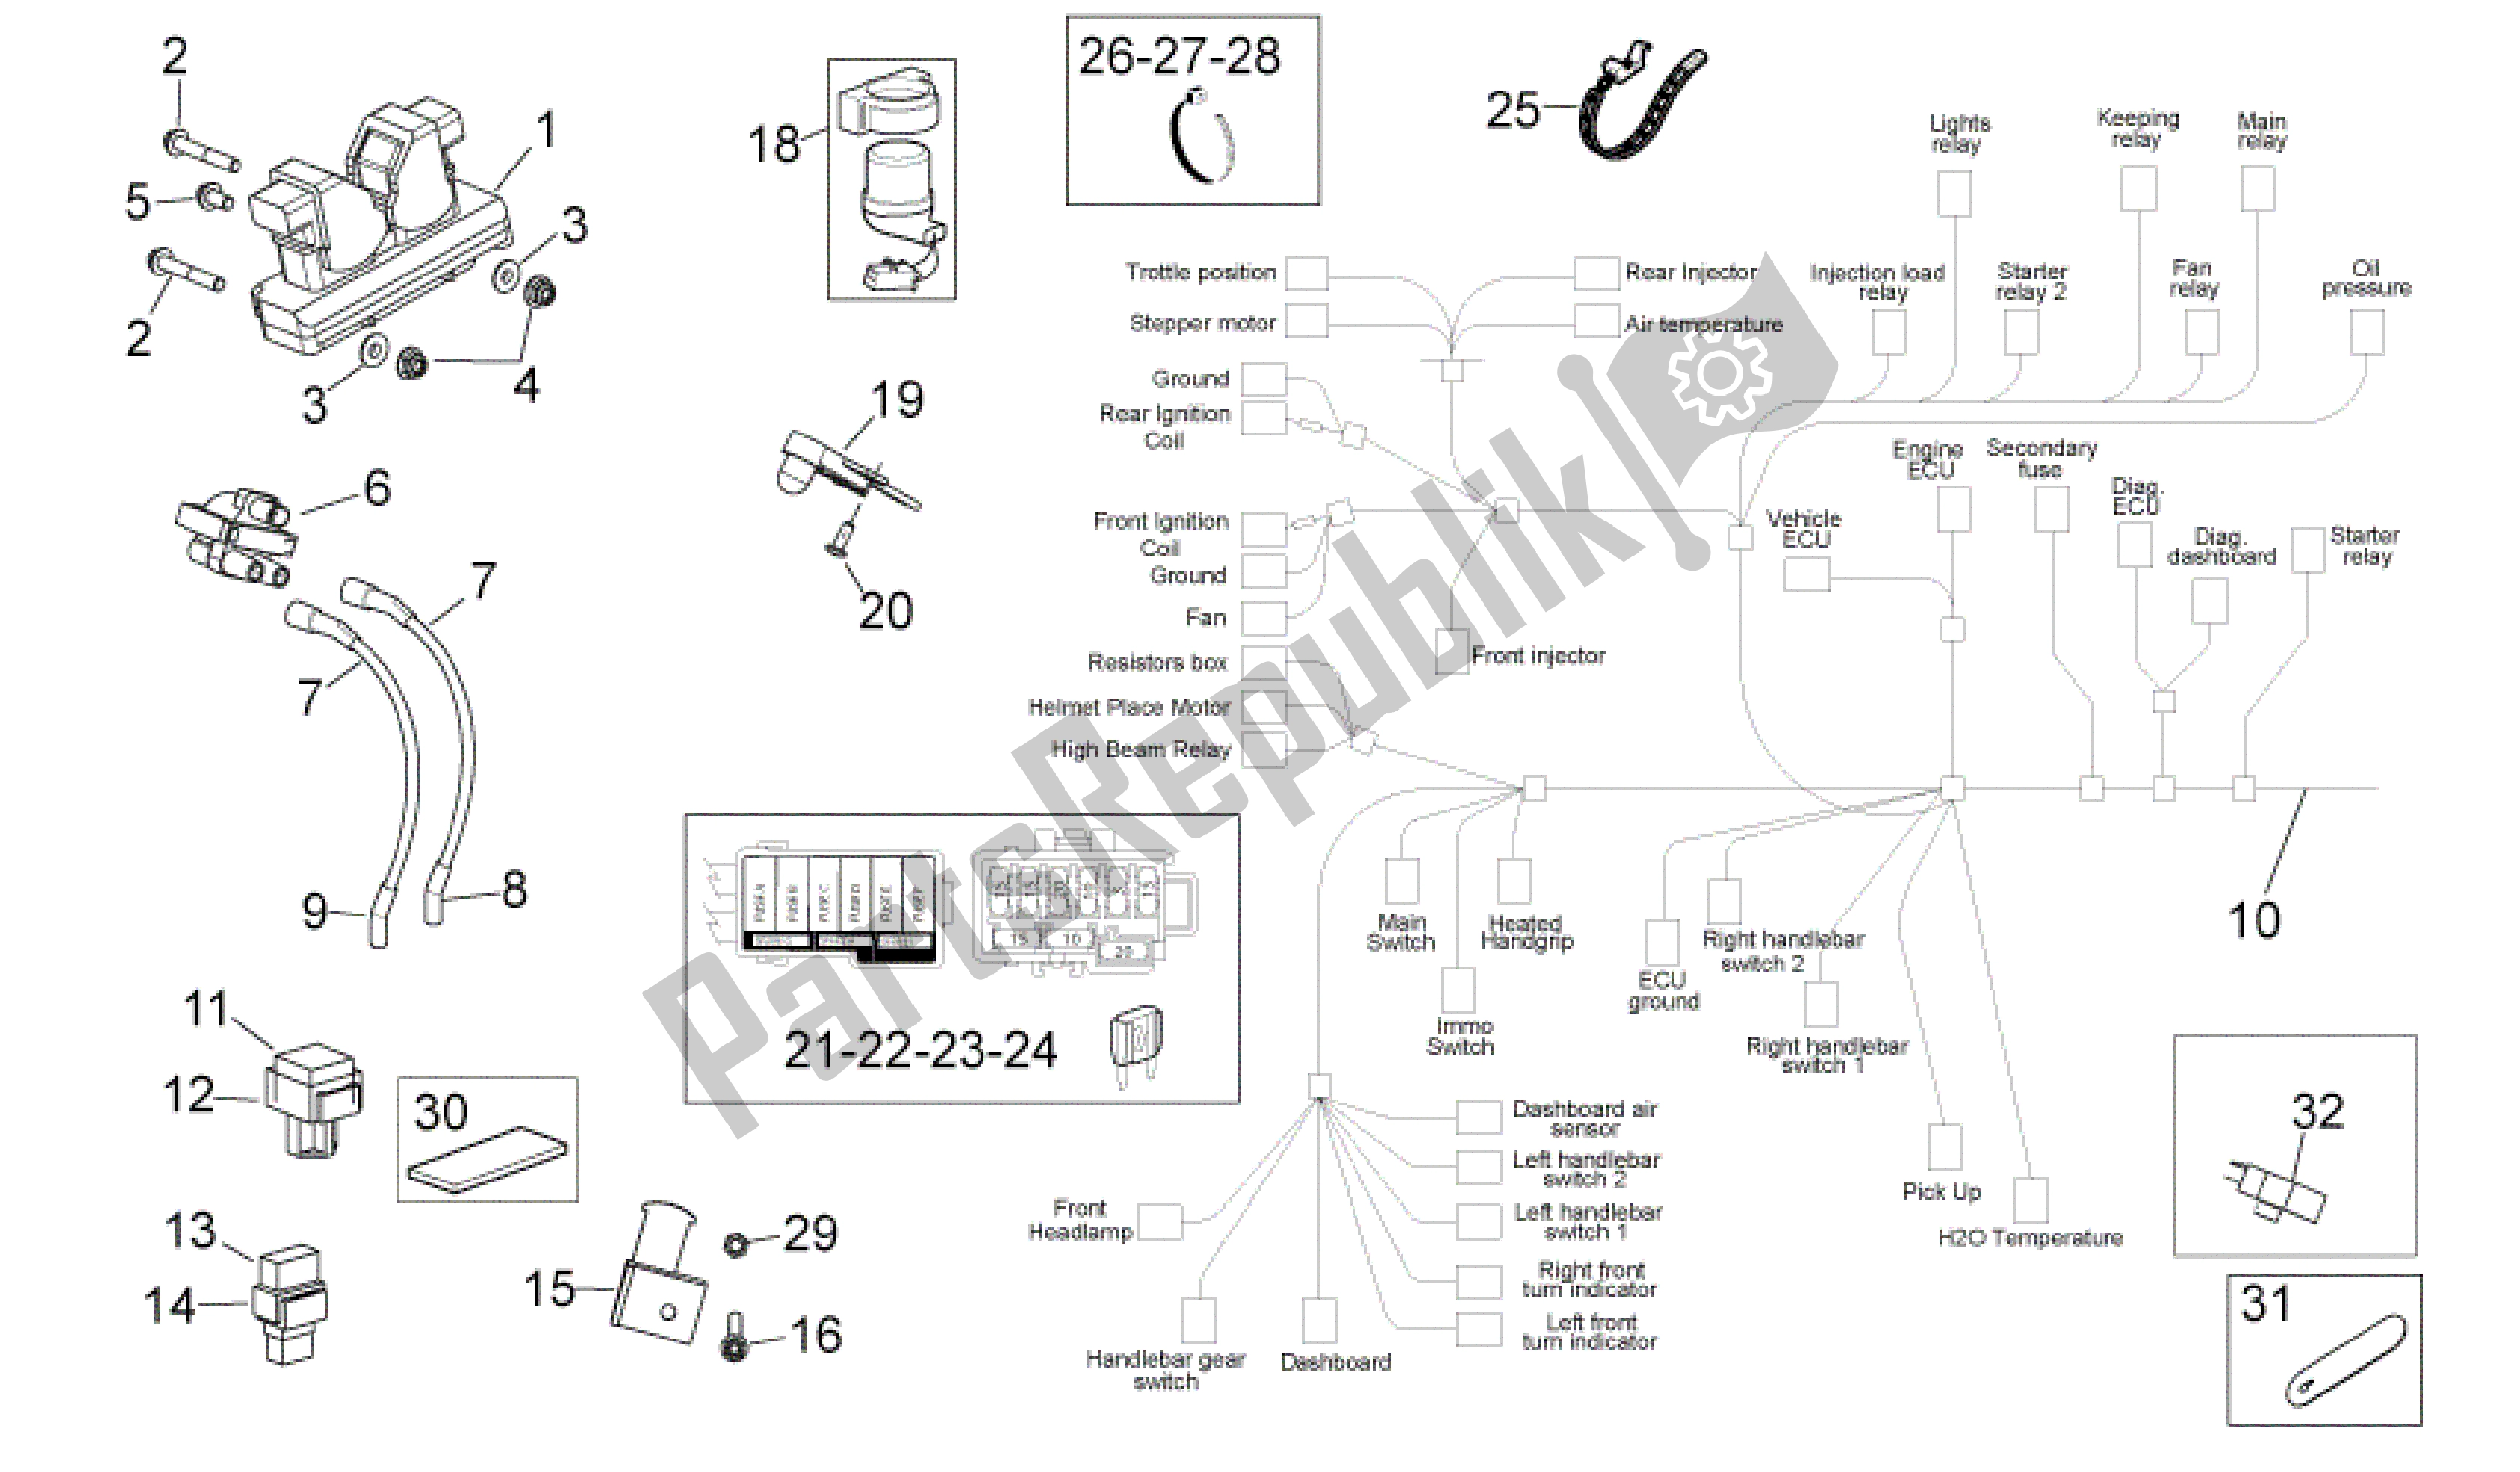 All parts for the Electrical System I of the Aprilia Mana 850 2007 - 2011